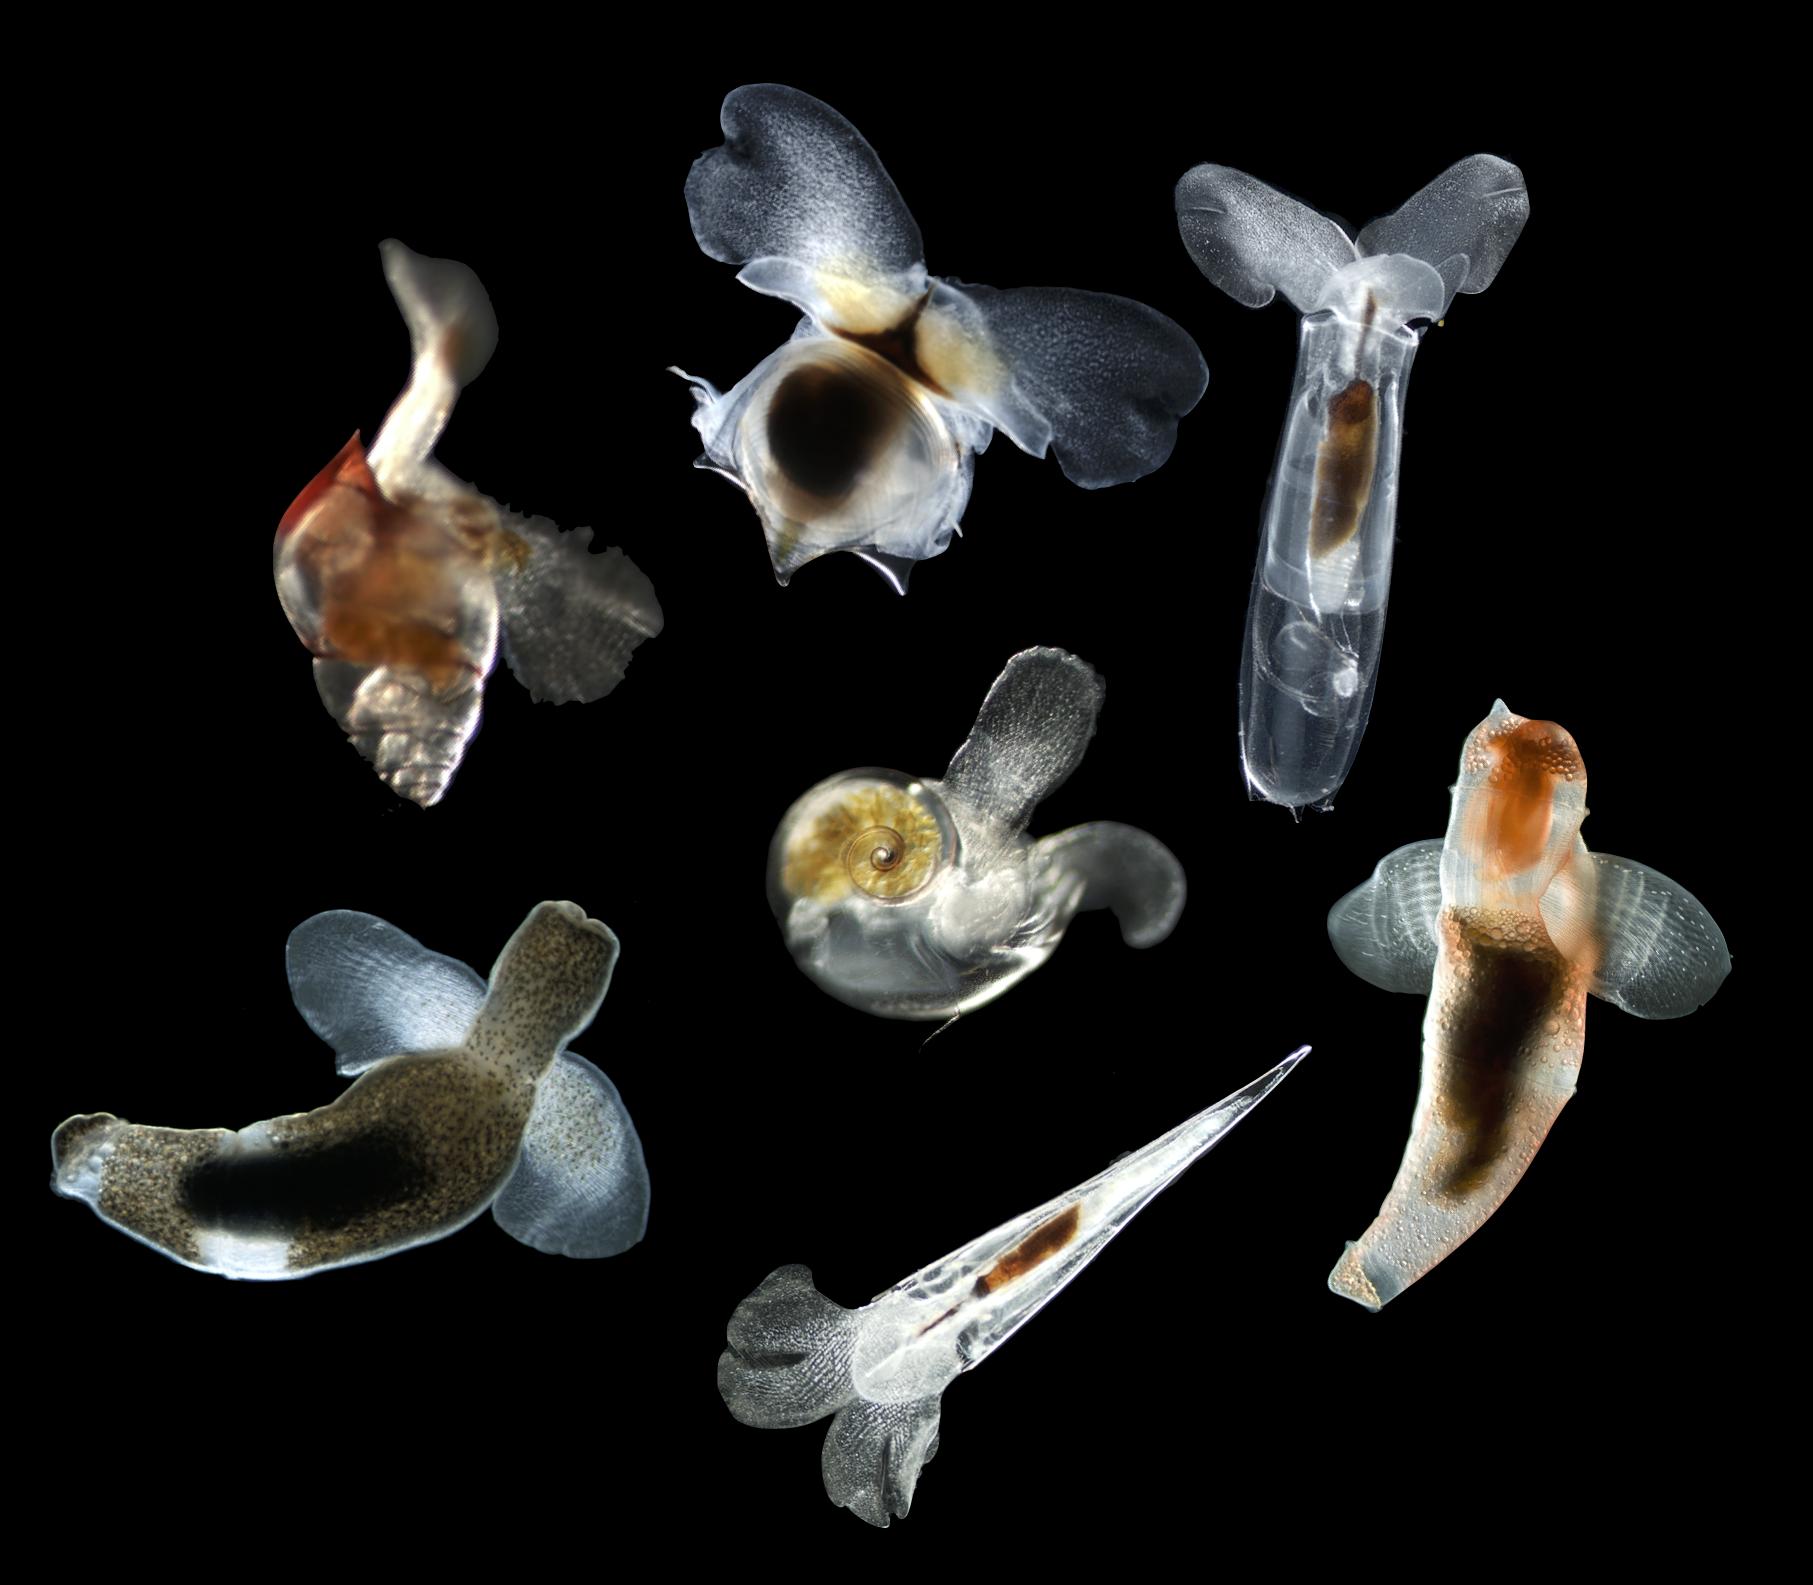 Several species of planktonic gastropods, including five sea butterflies (shelled) and two sea angels (naked). Some translucent portions of the bodies are apparent against a black background.